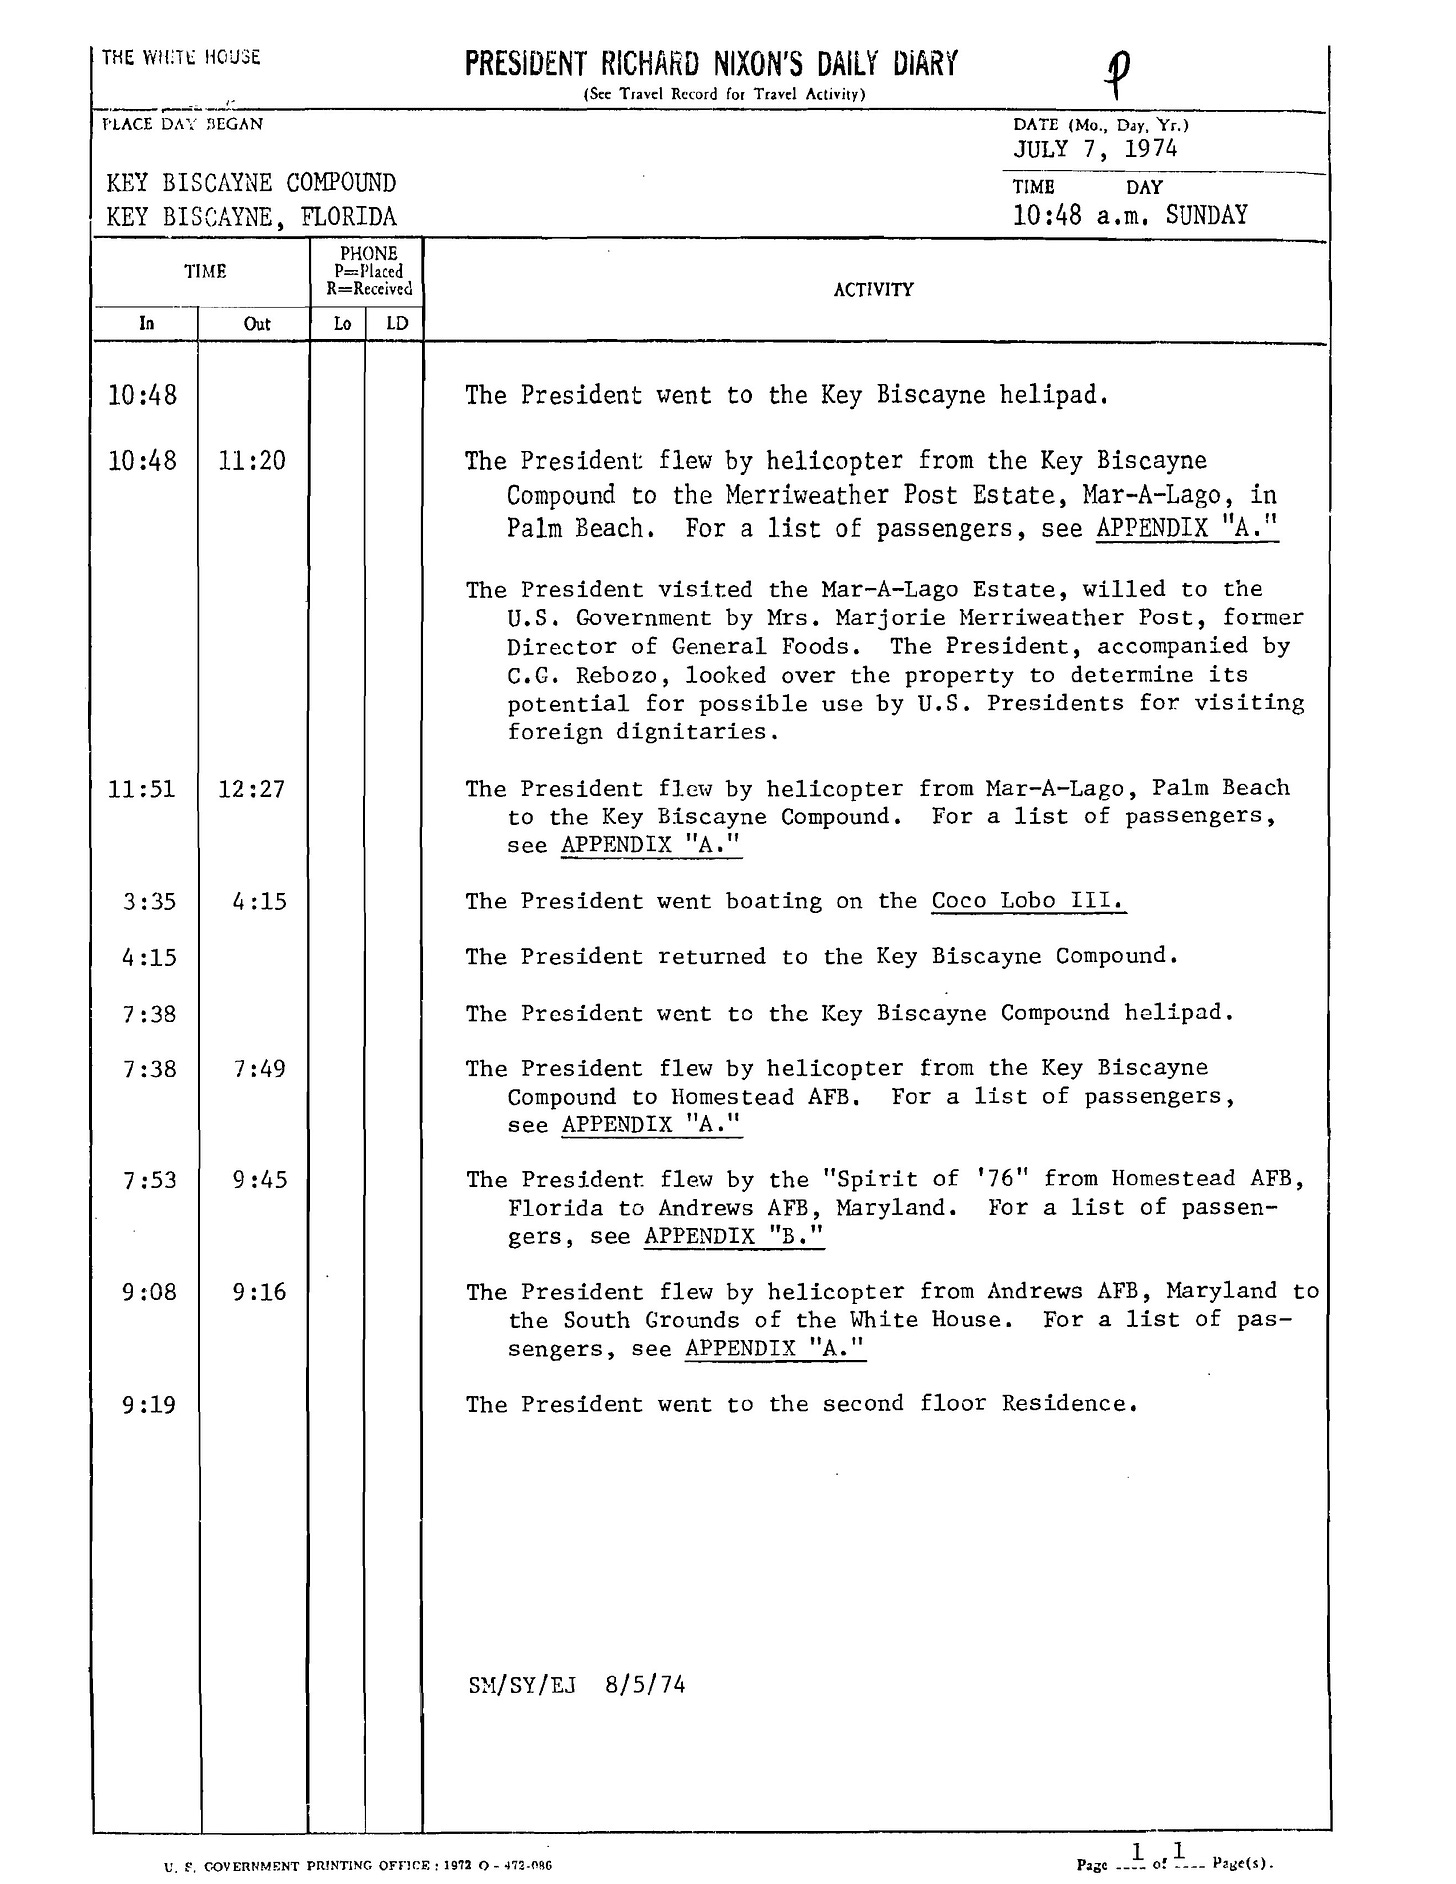 A page from Richard Nixon's Daily Diary on July 7, 1974, the day he visited Mar-a-Lago.